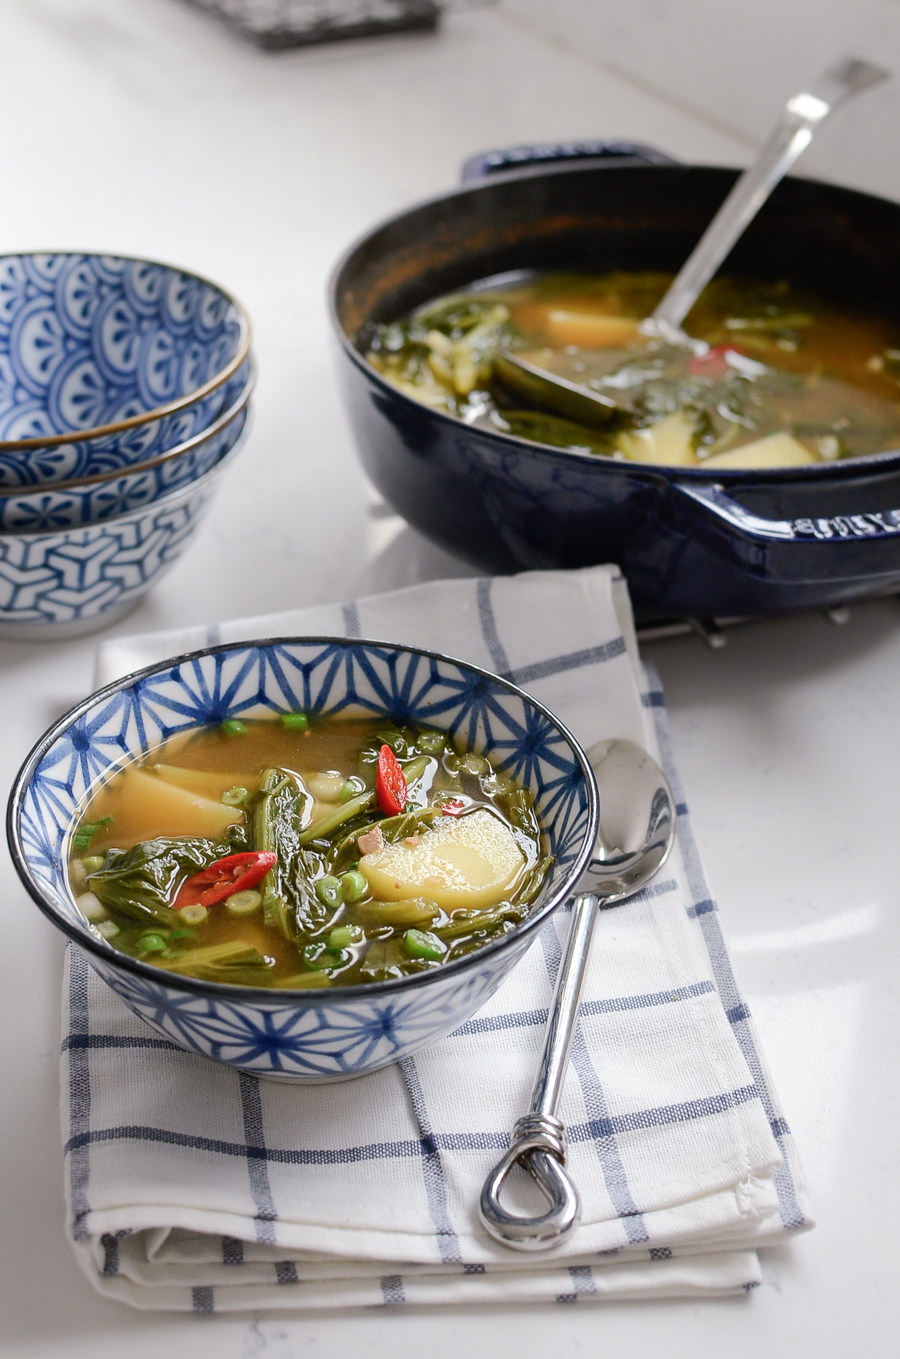 A Korean style turnip green potato soup is served in a blue bowl.